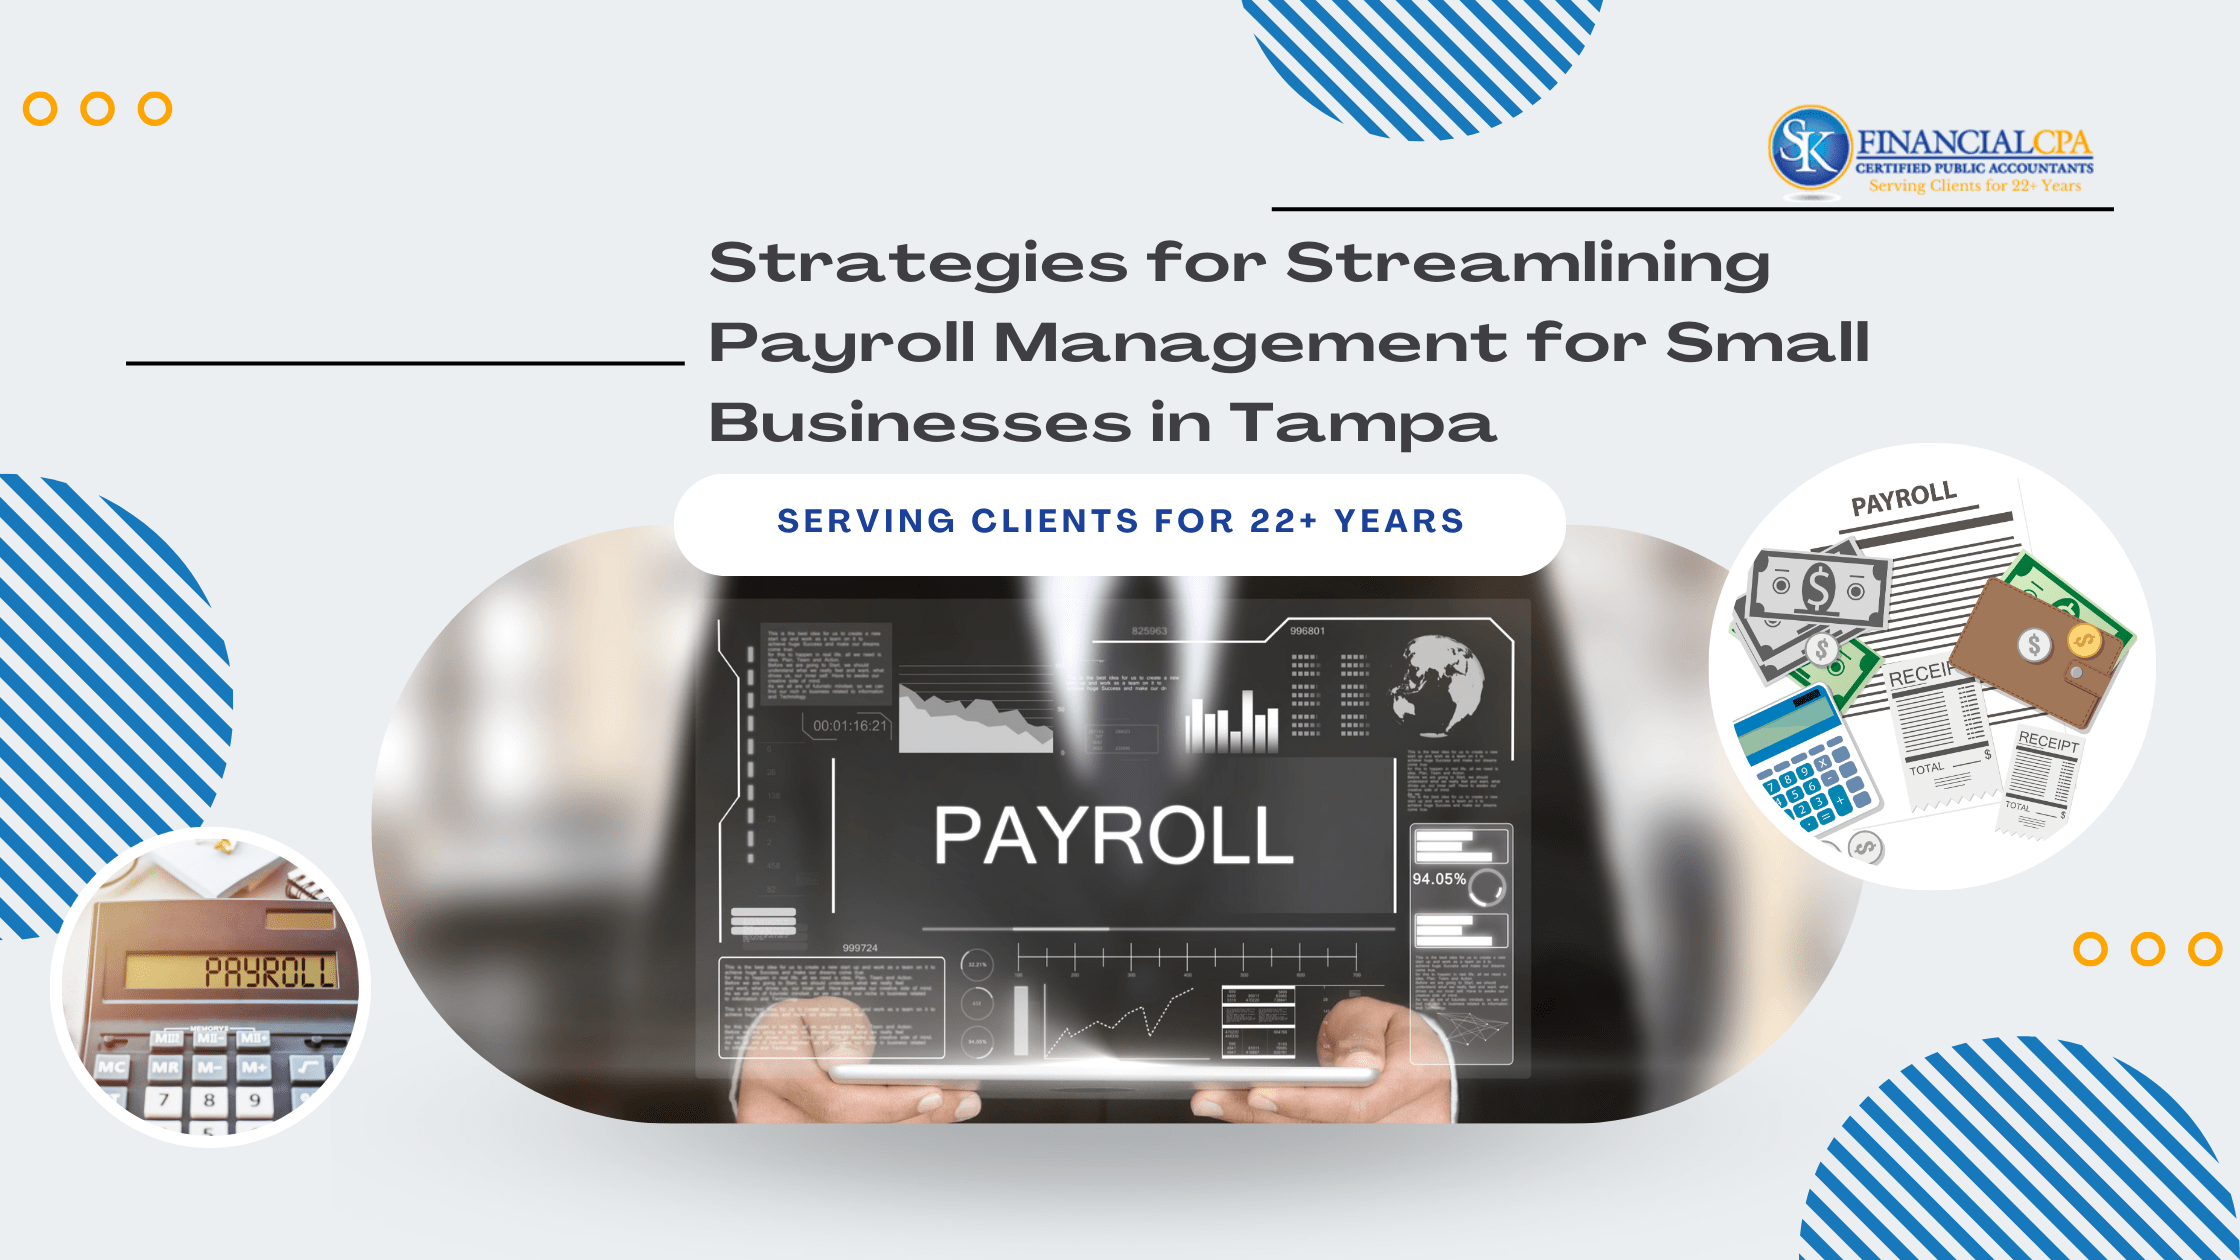 Payroll Management Strategies for Small Businesses in Tampa